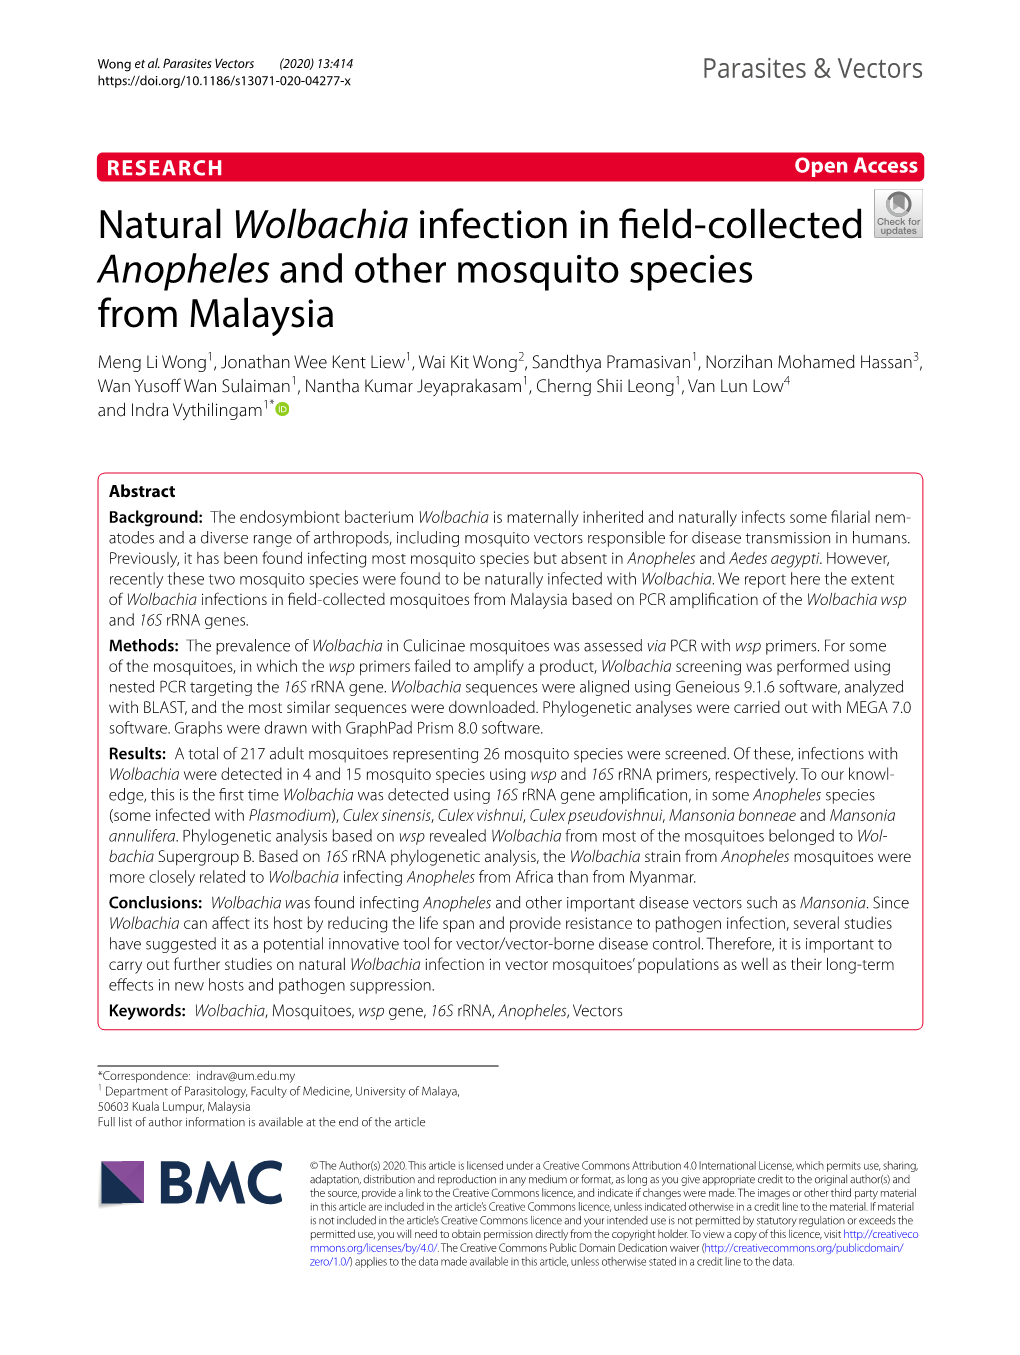 Natural Wolbachia Infection in Field-Collected Anopheles and Other